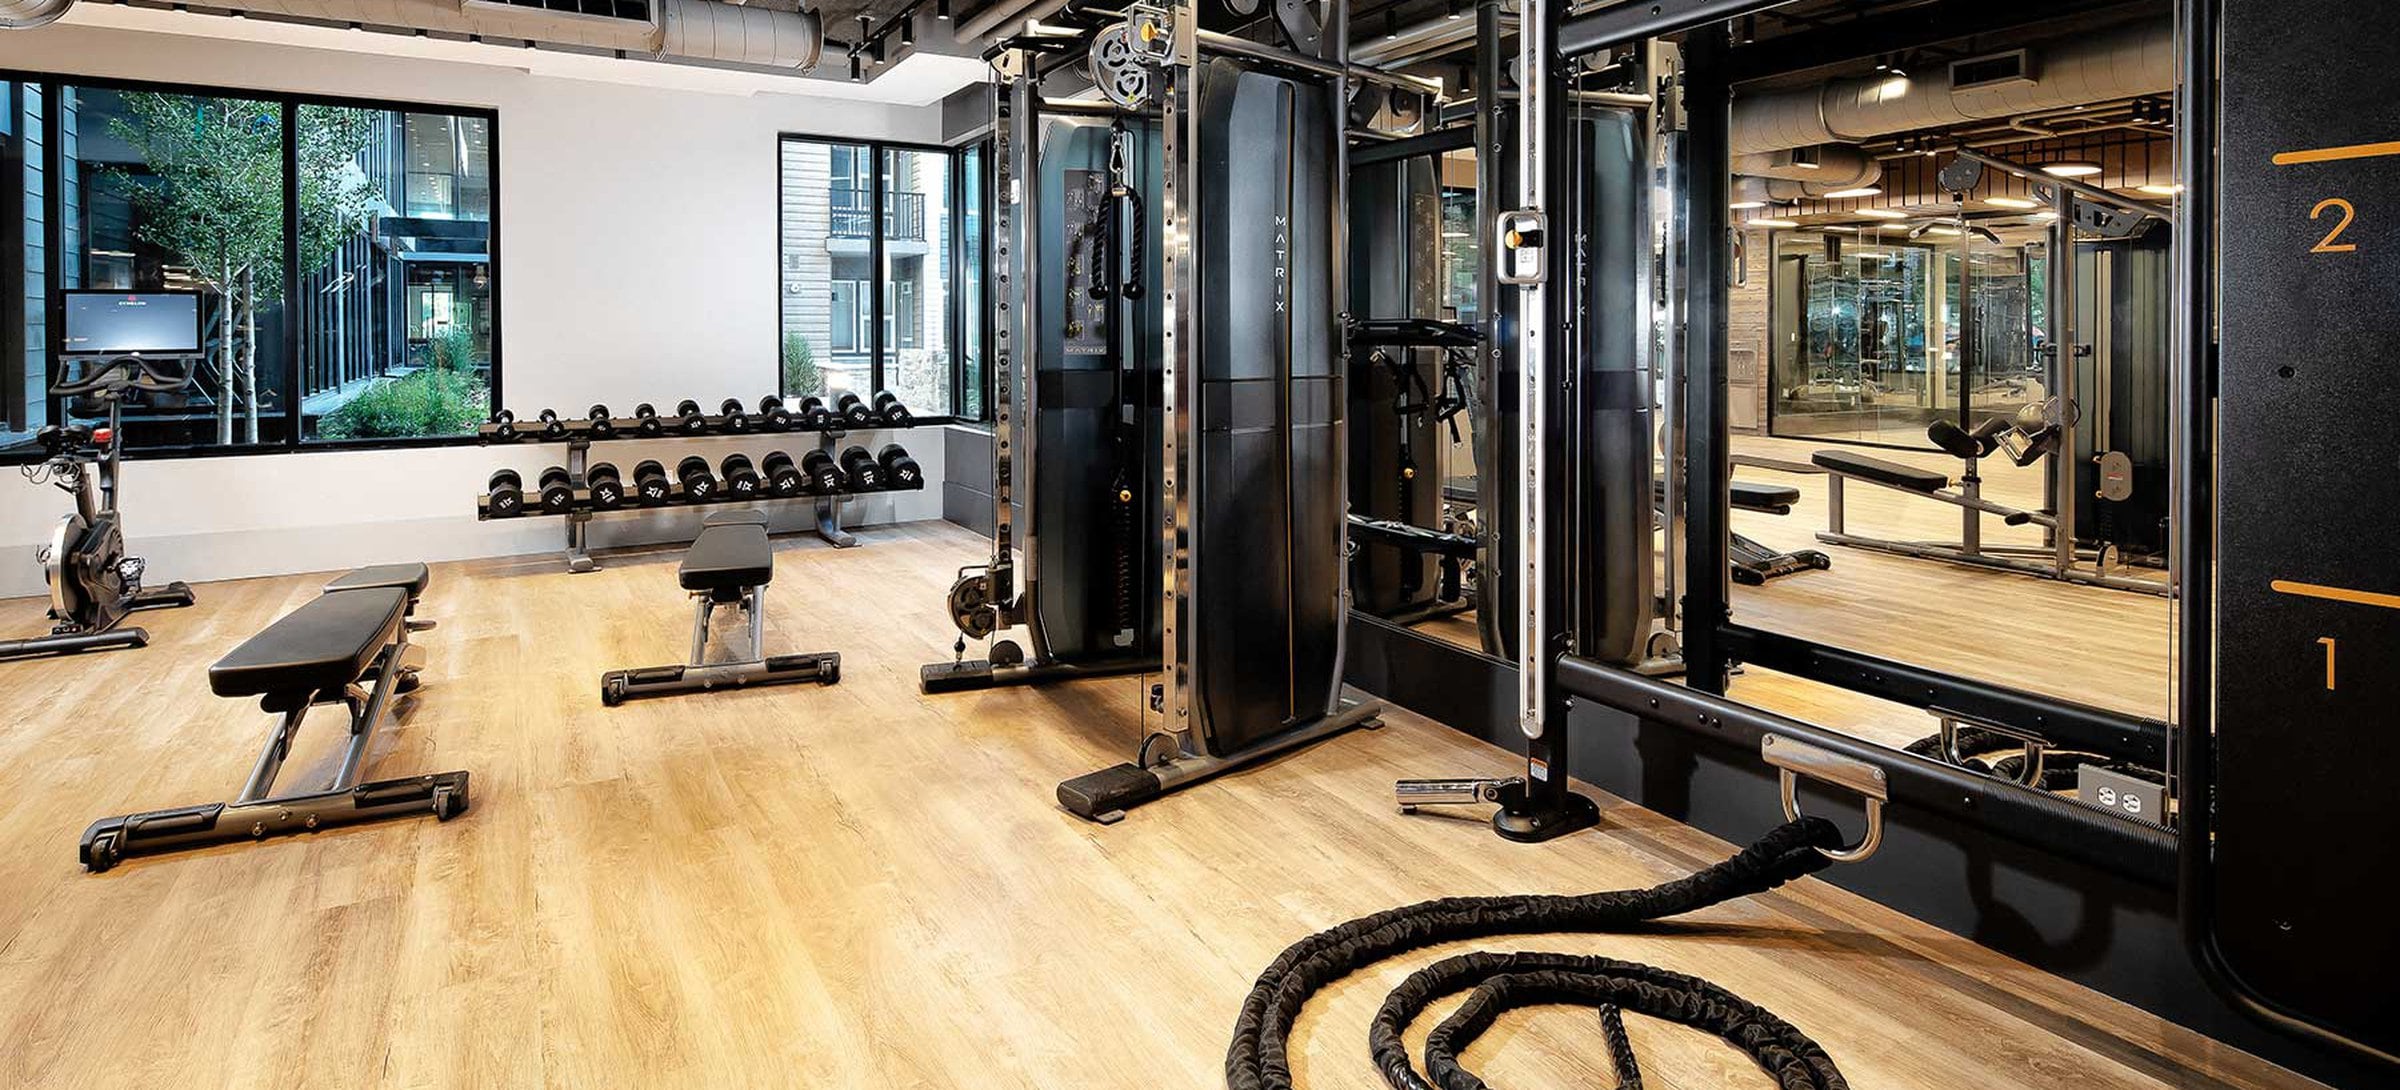 Fitness Center with Weights and Conditioning Equipment